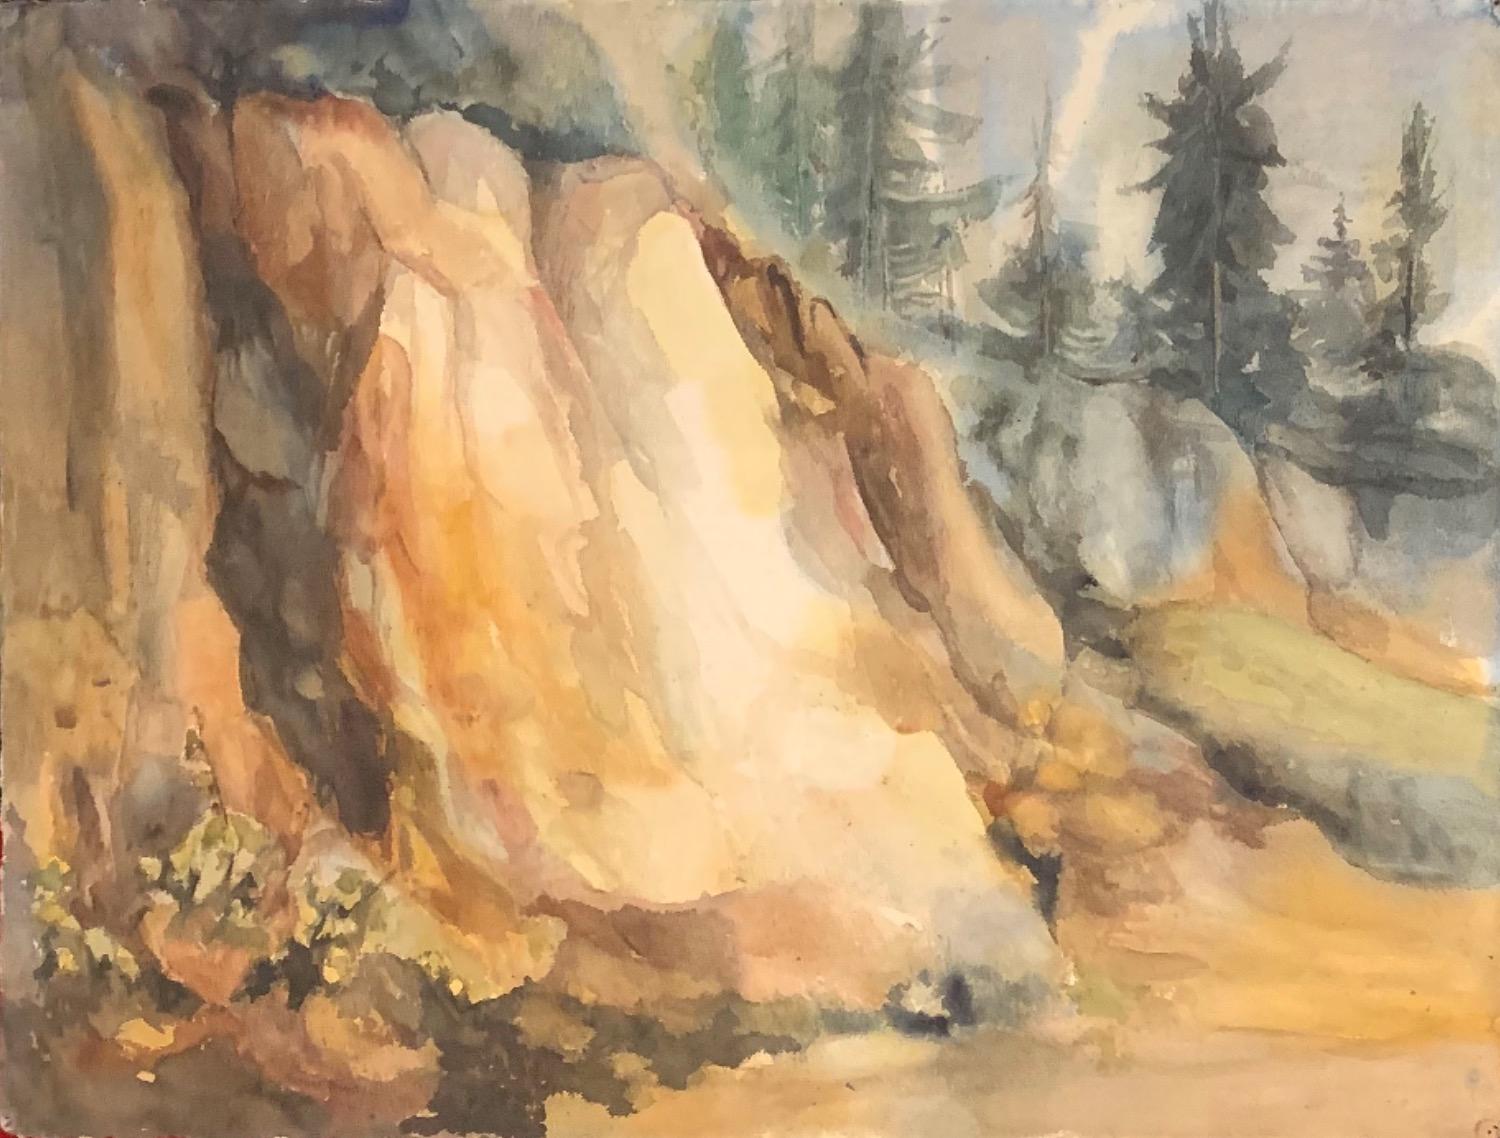 Thelma Corbin Moody Landscape Painting - 1960s "Mountain Side" Watercolor Landscape California Gold Country Mid Century 